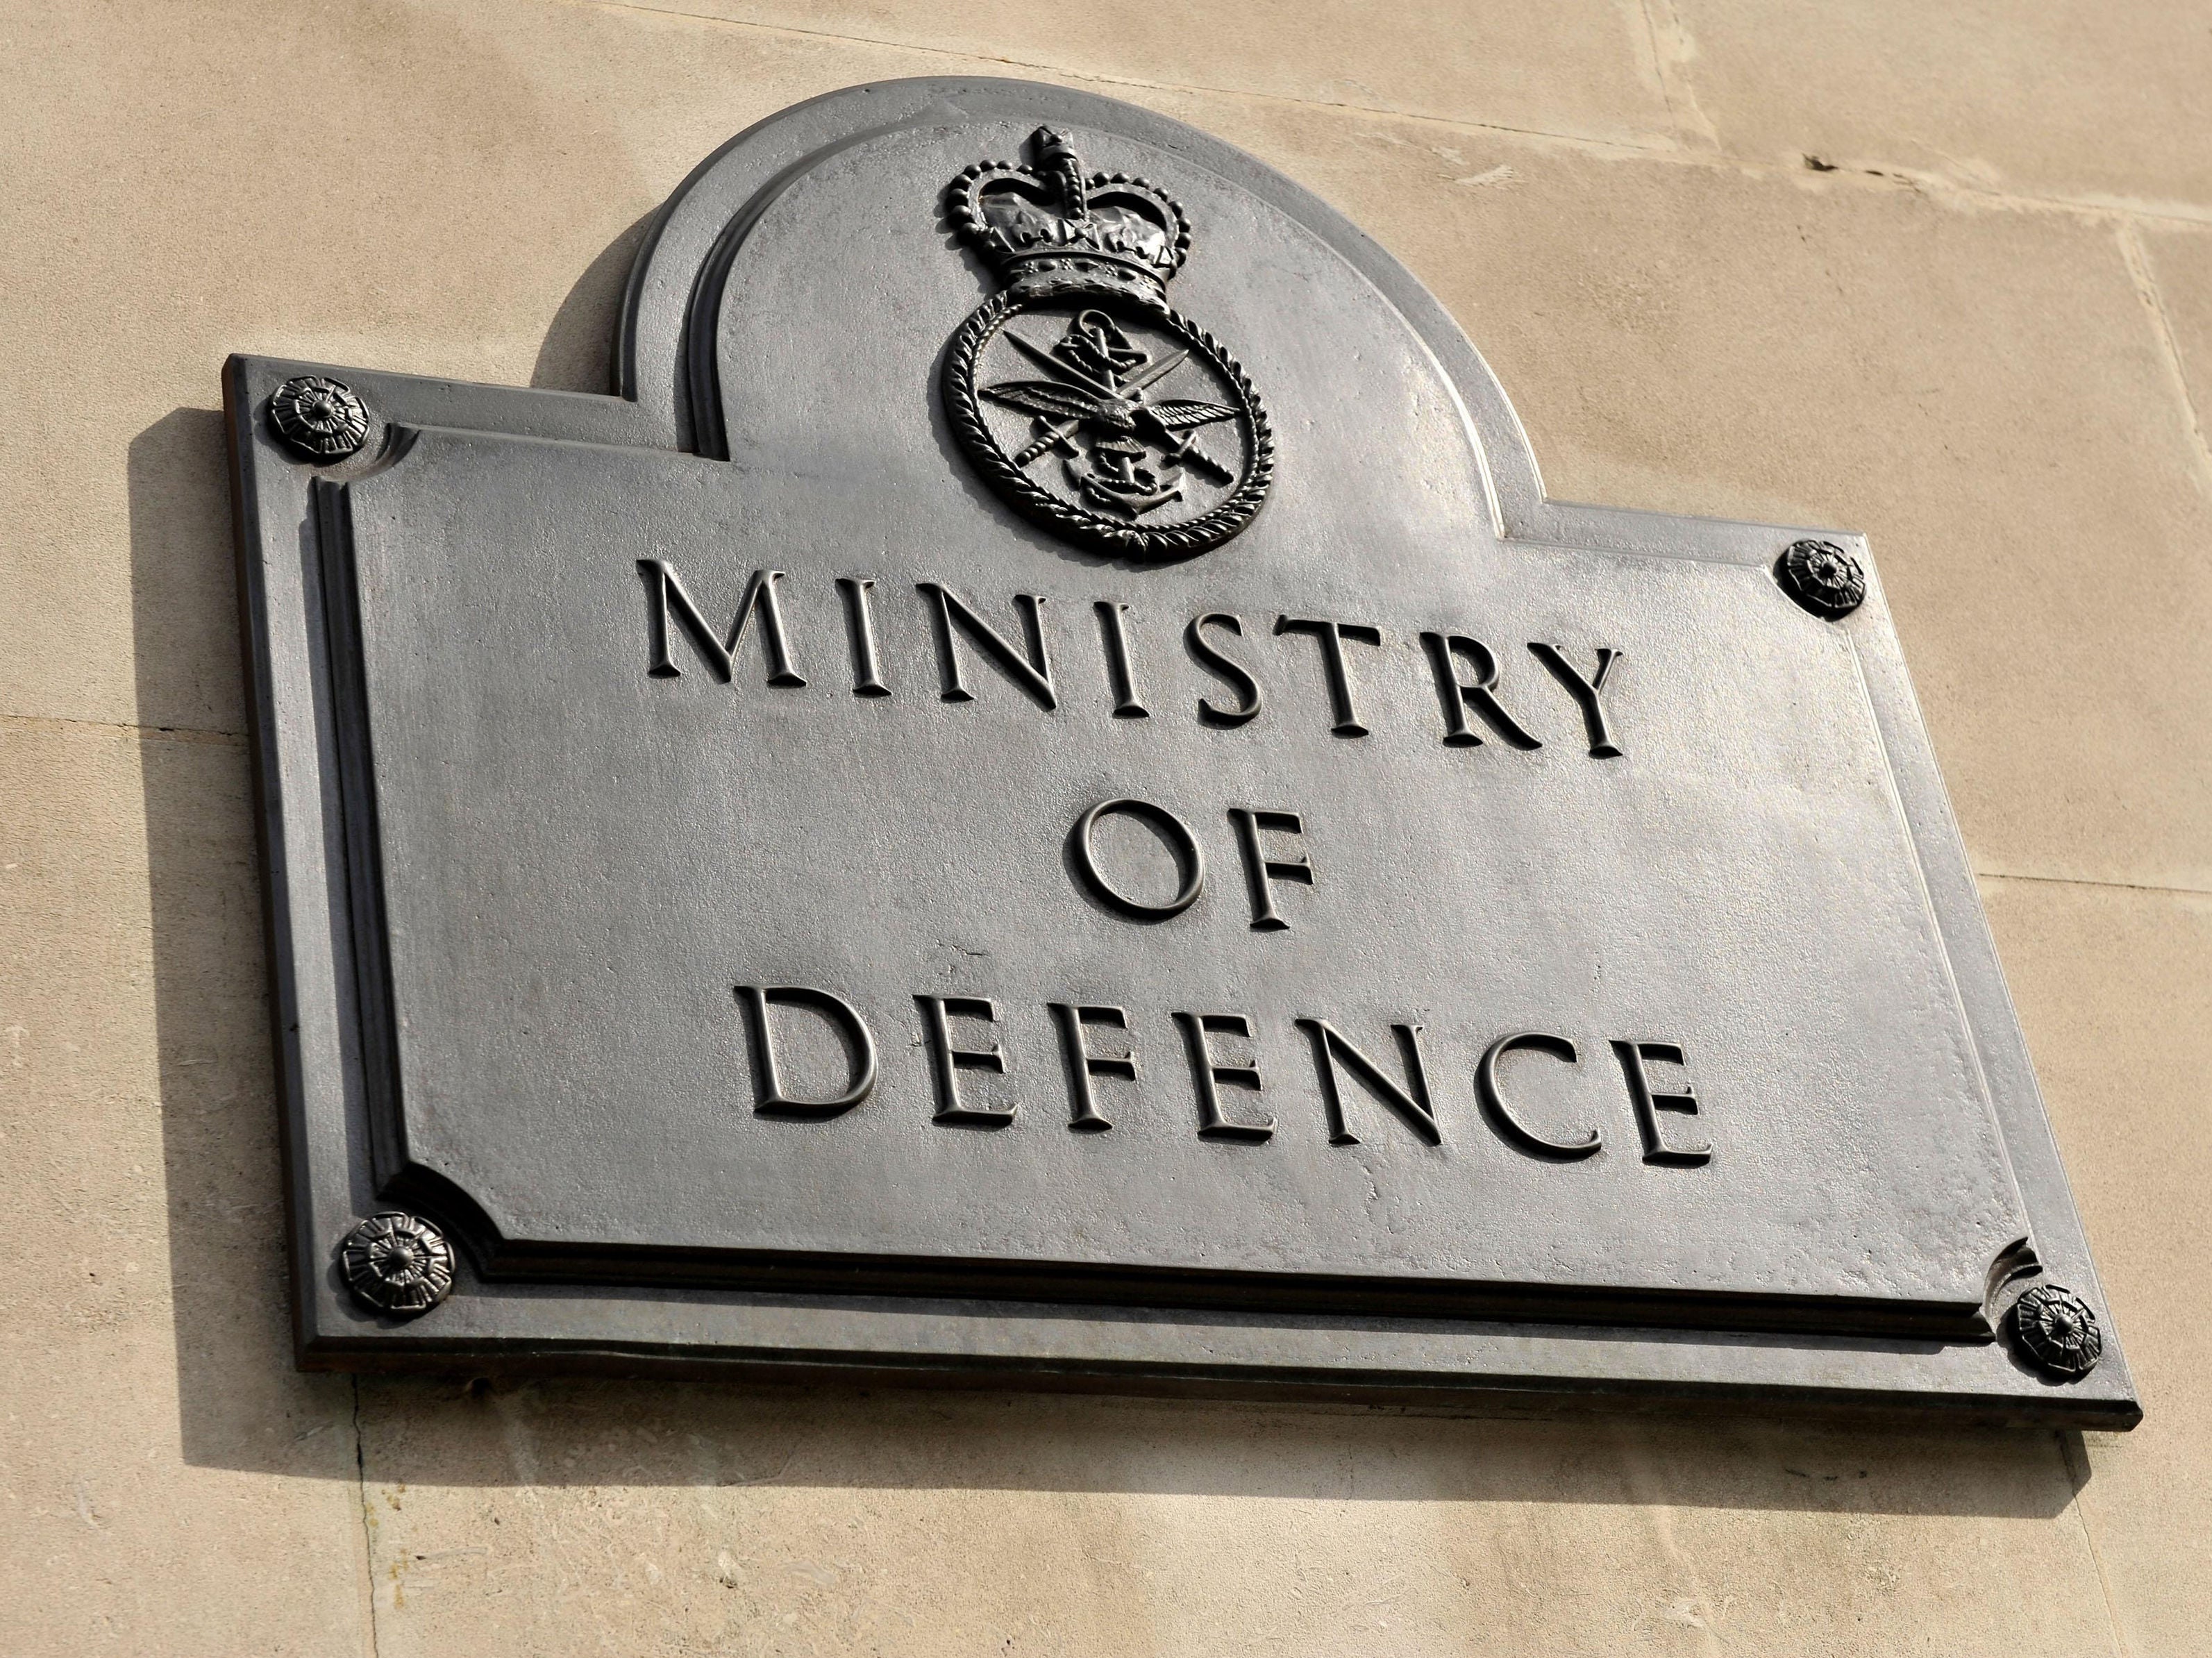 The Ministry of Defence is carrying out an inquiry into the documents found at a bus stop last week